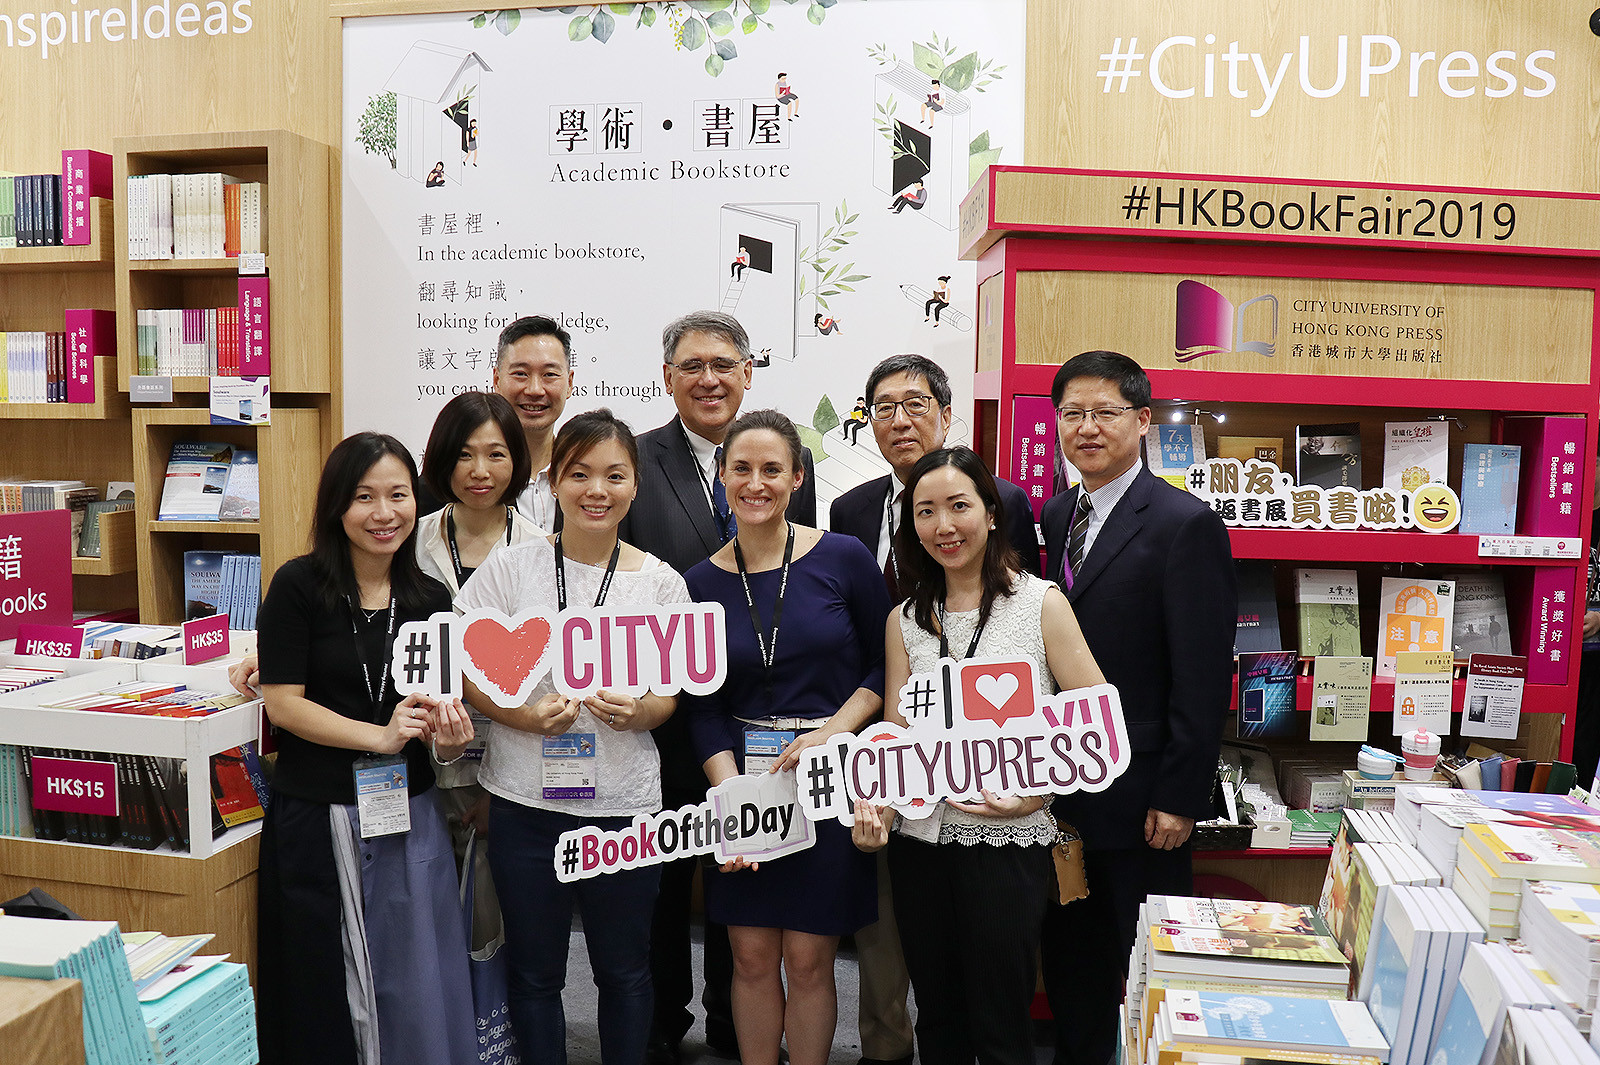 Mr Huang (back row; second from left), President Kuo (back row; second from right) and Professor Zhu Guobin, Director of CityU Press (back row; first from right) at the booth of CityU Press.